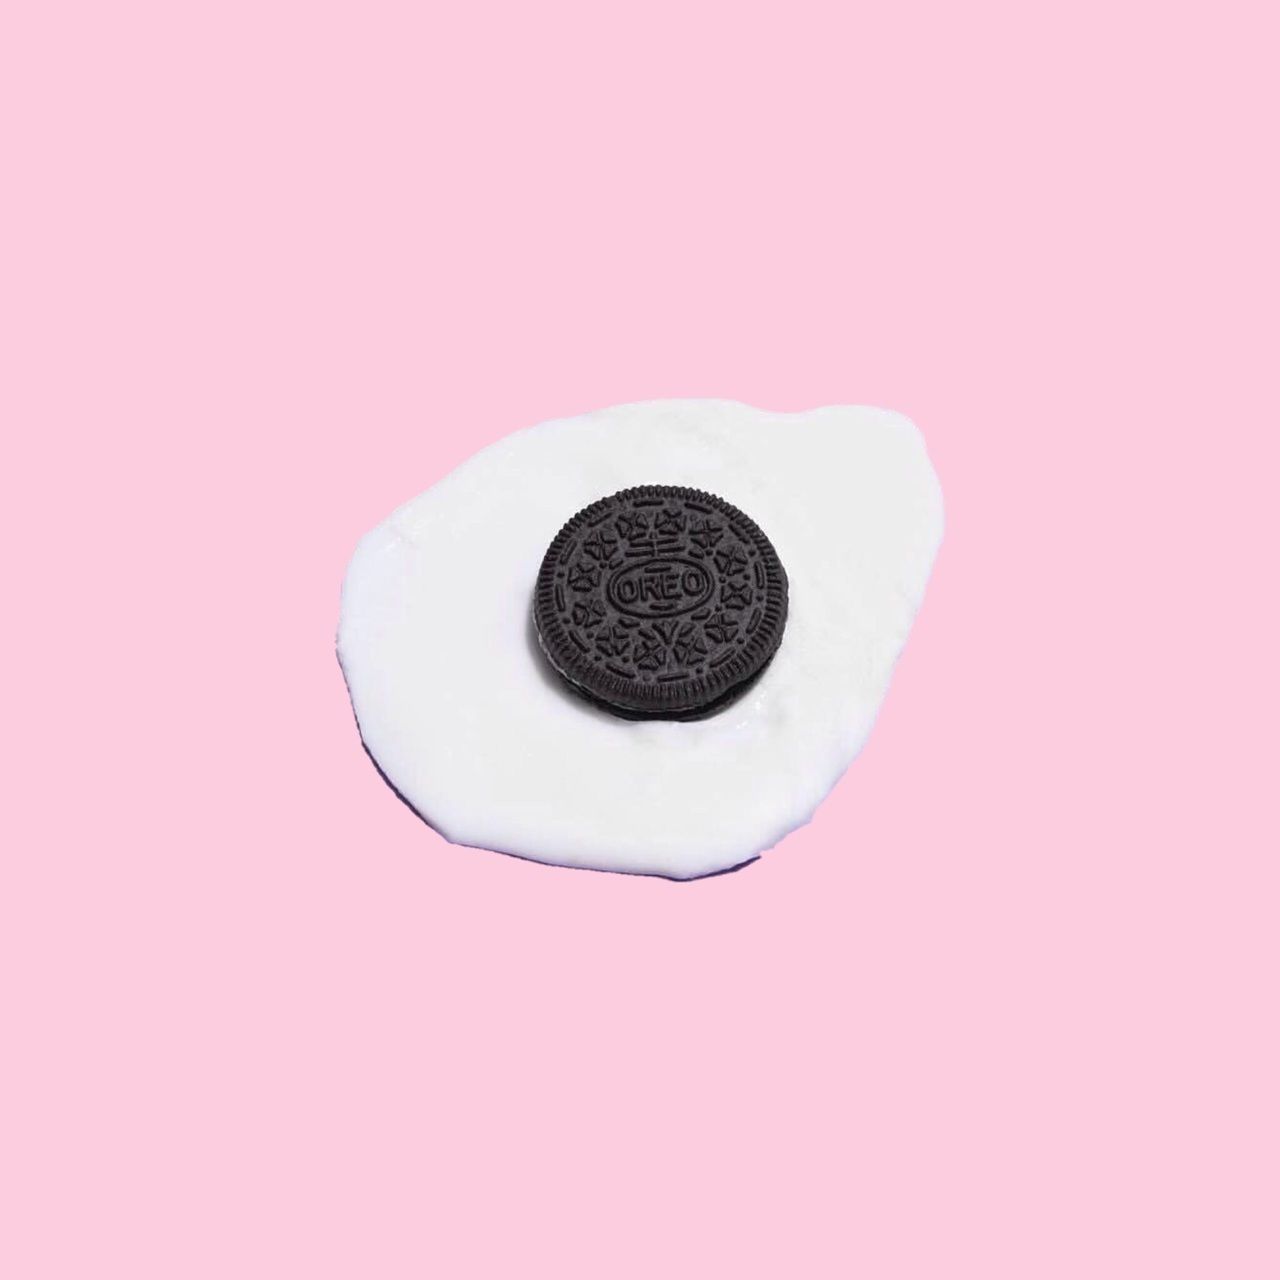 A fried egg with an Oreo in the middle on a pink background - Oreo